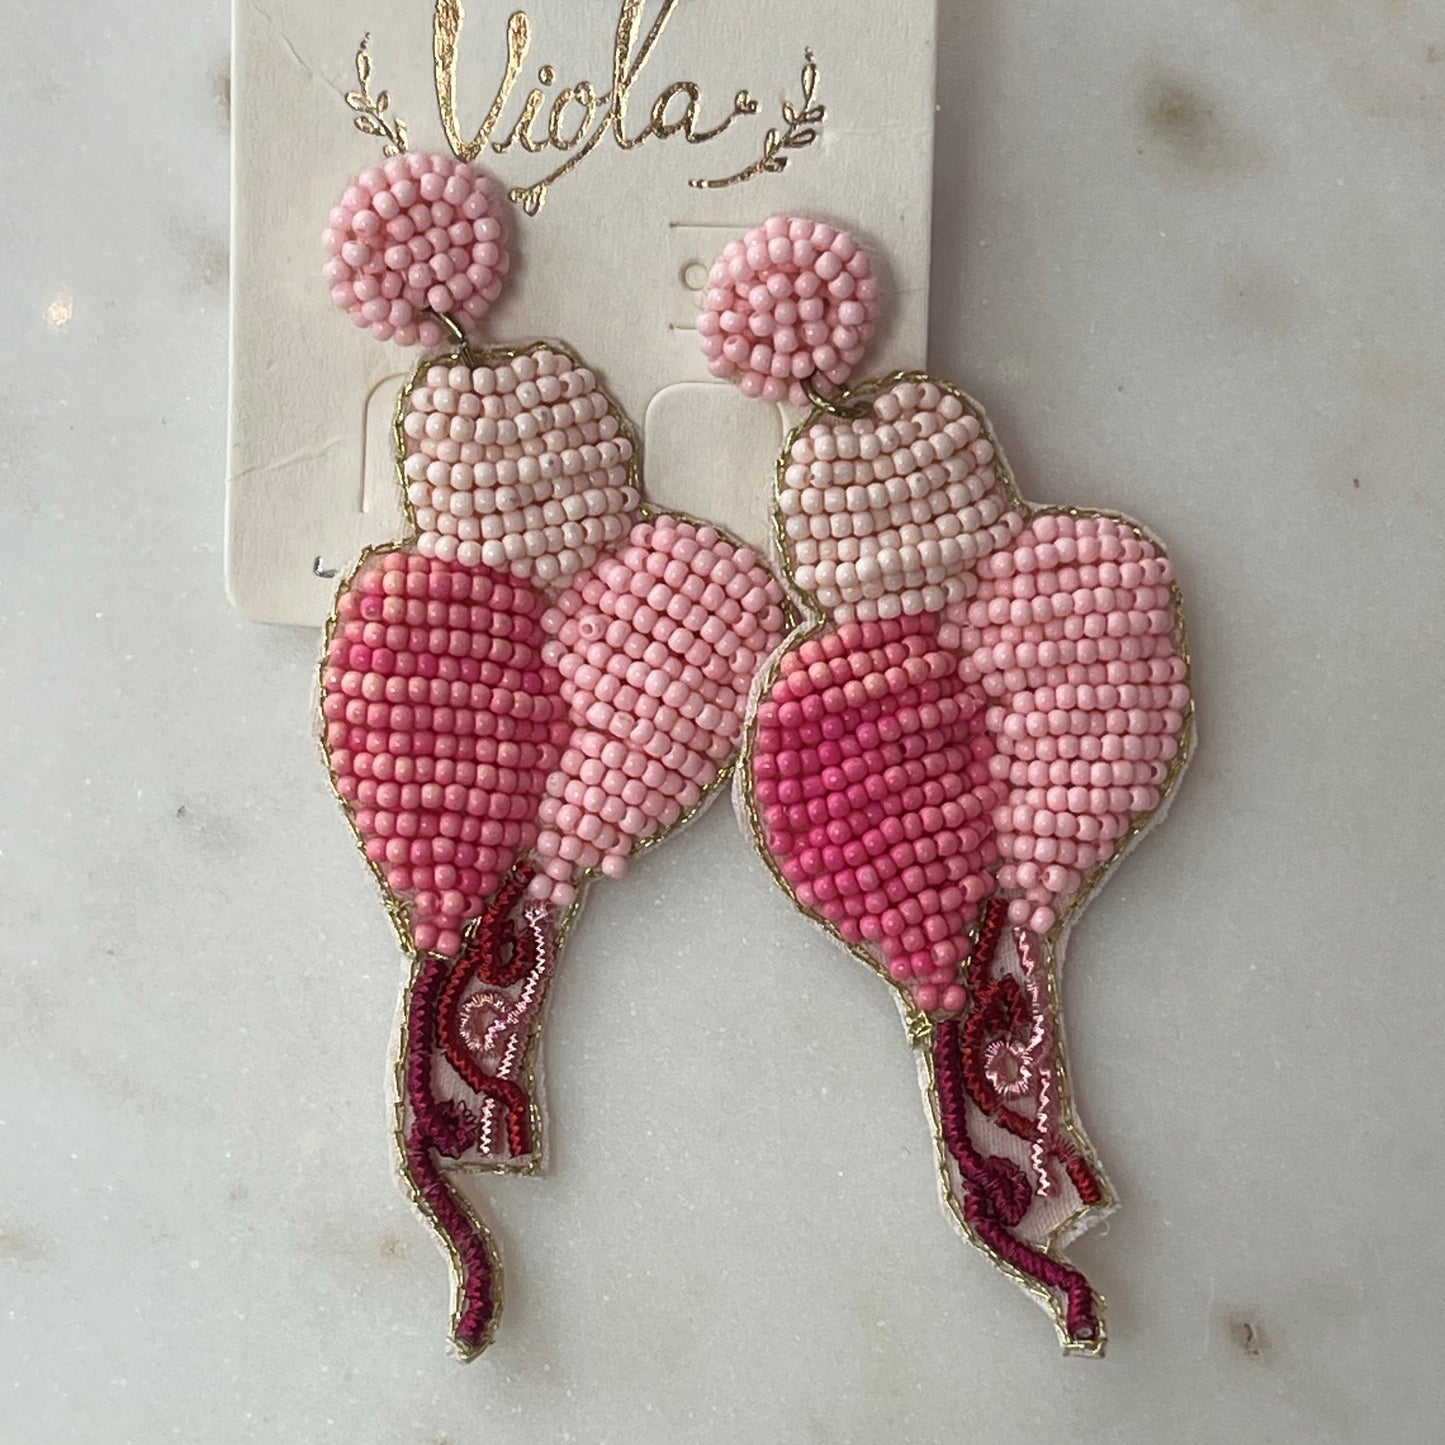 beaded balloon earrings in pink, dark pink and light pink